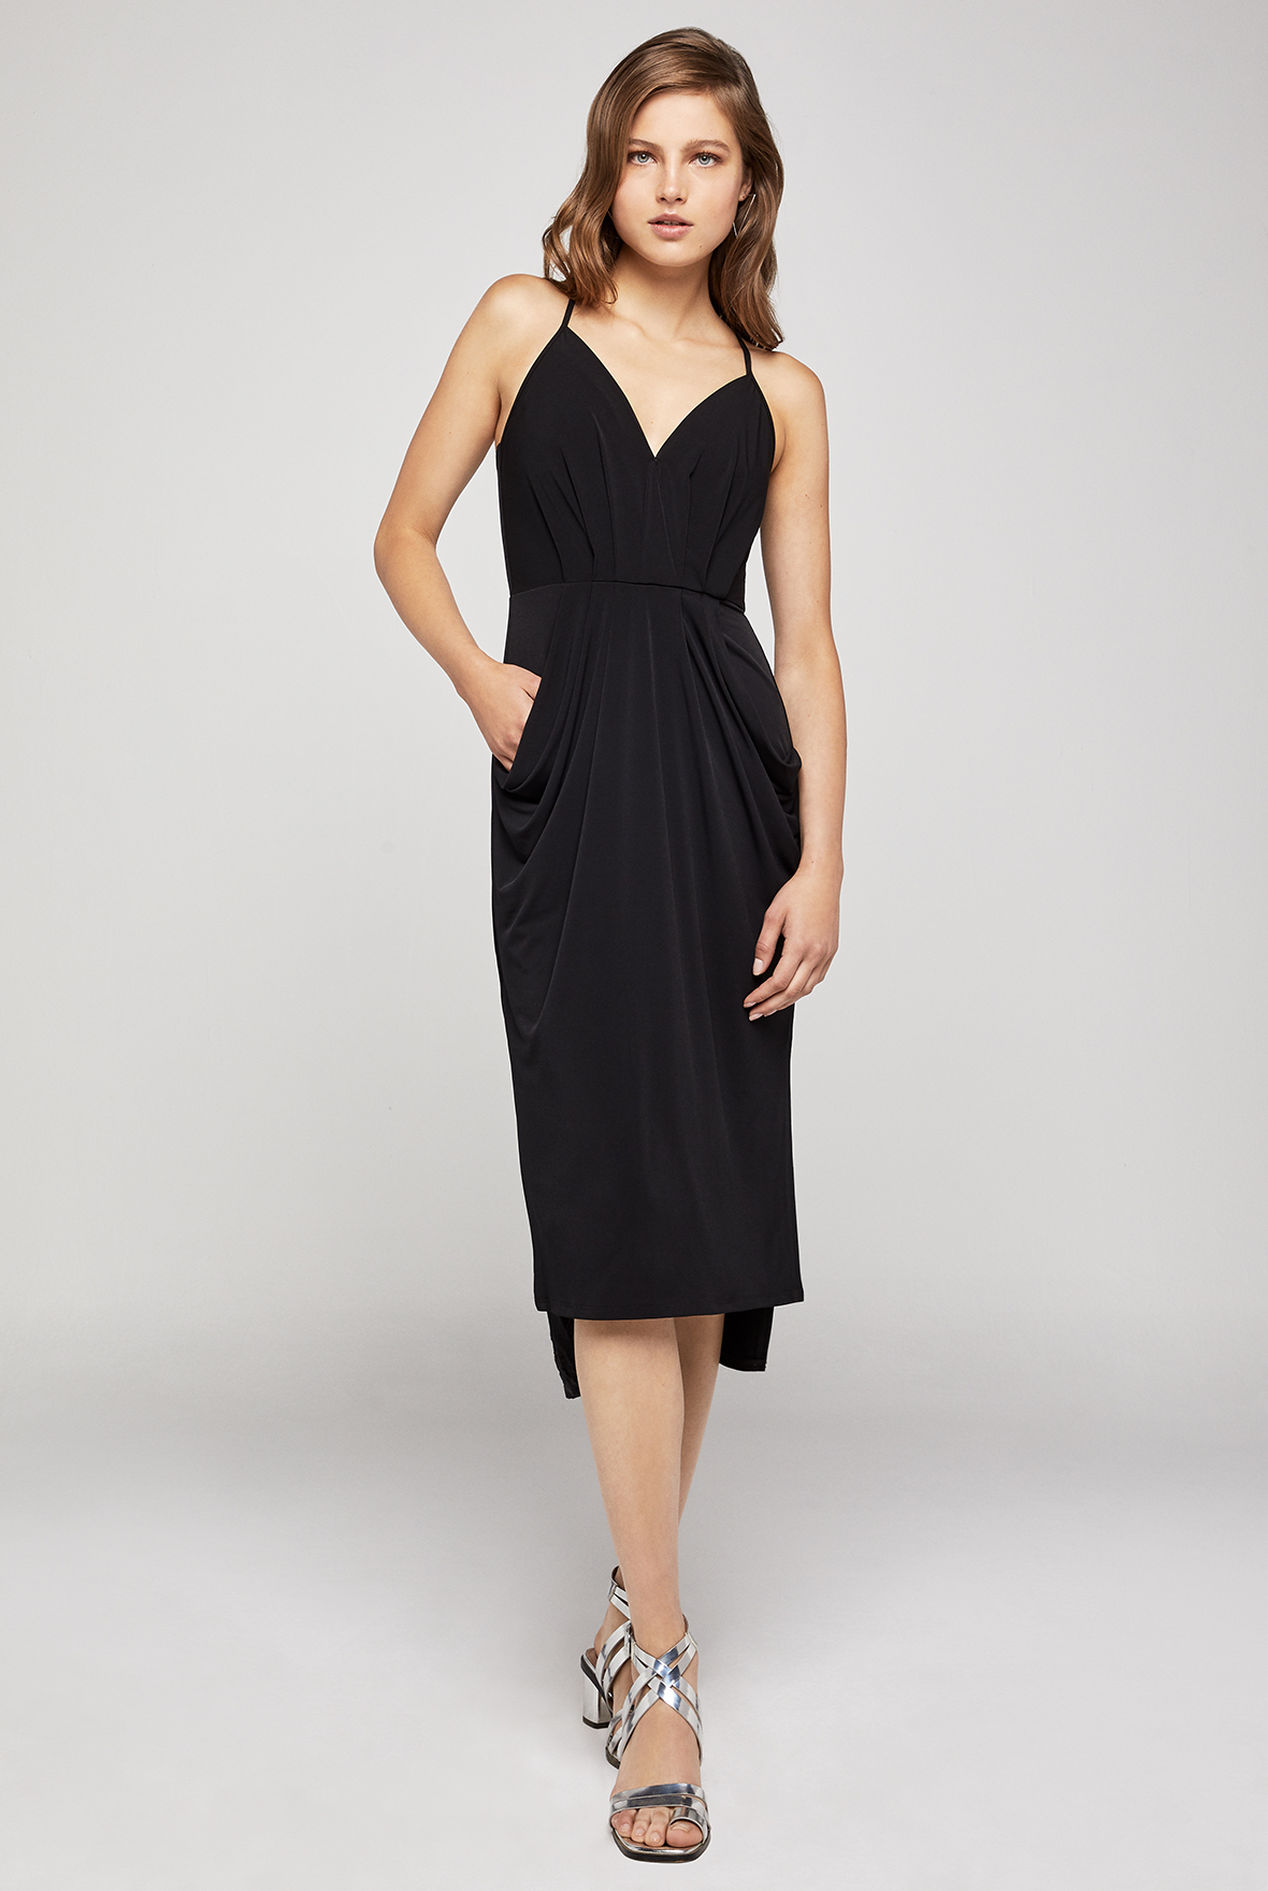 Shop This BCBGeneration Dress on Sale at Bloomingdale's